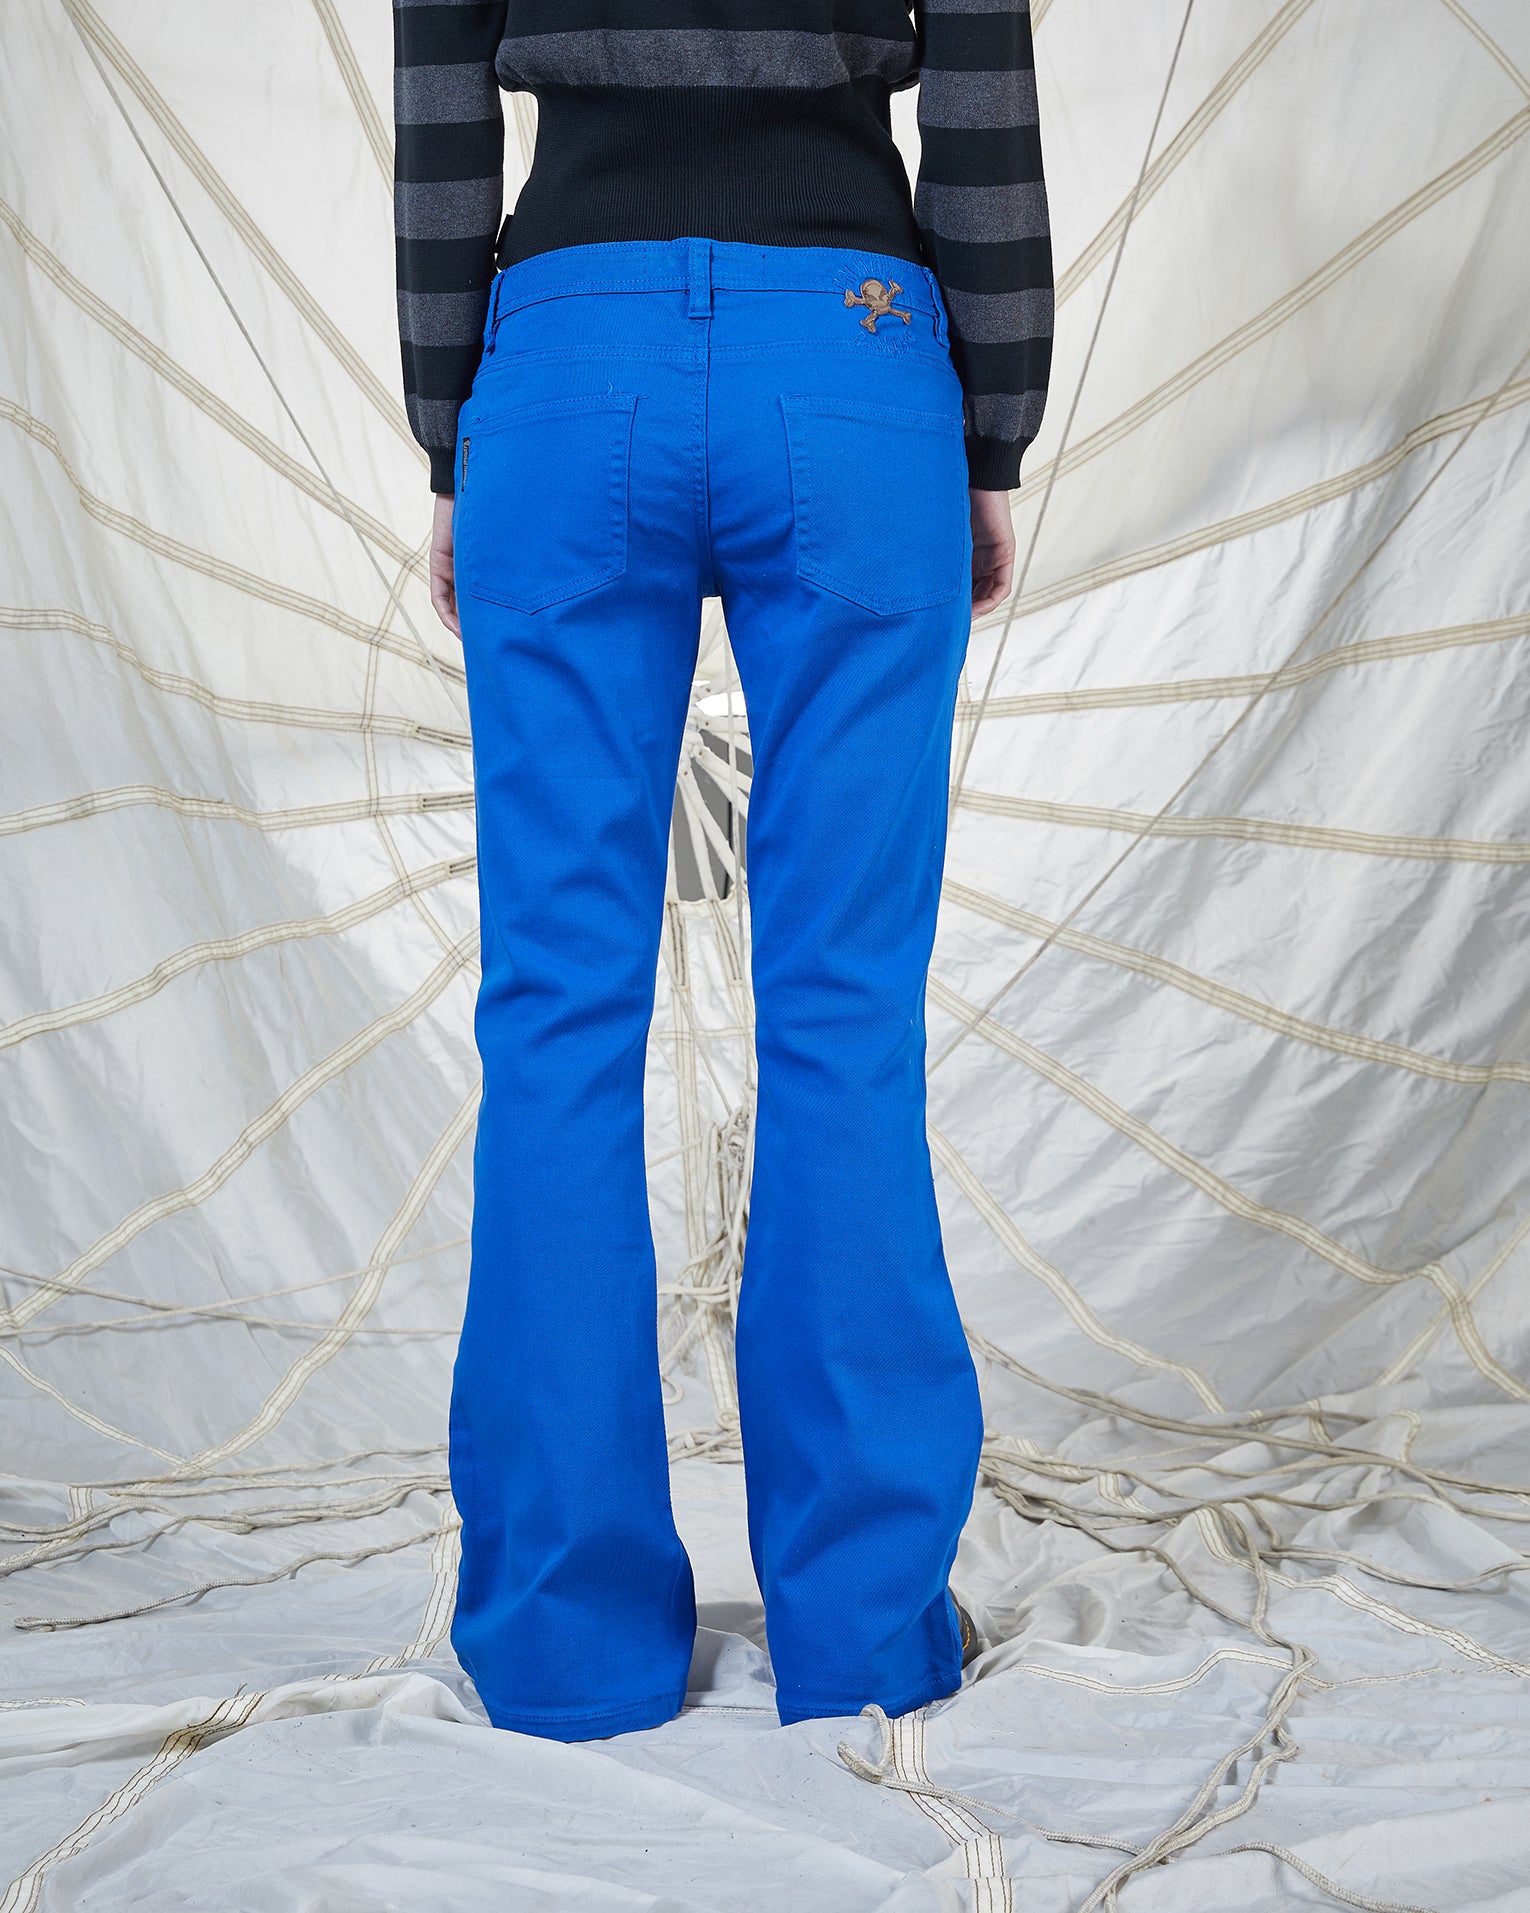 MIAMI FLARED JEANS - BLUE